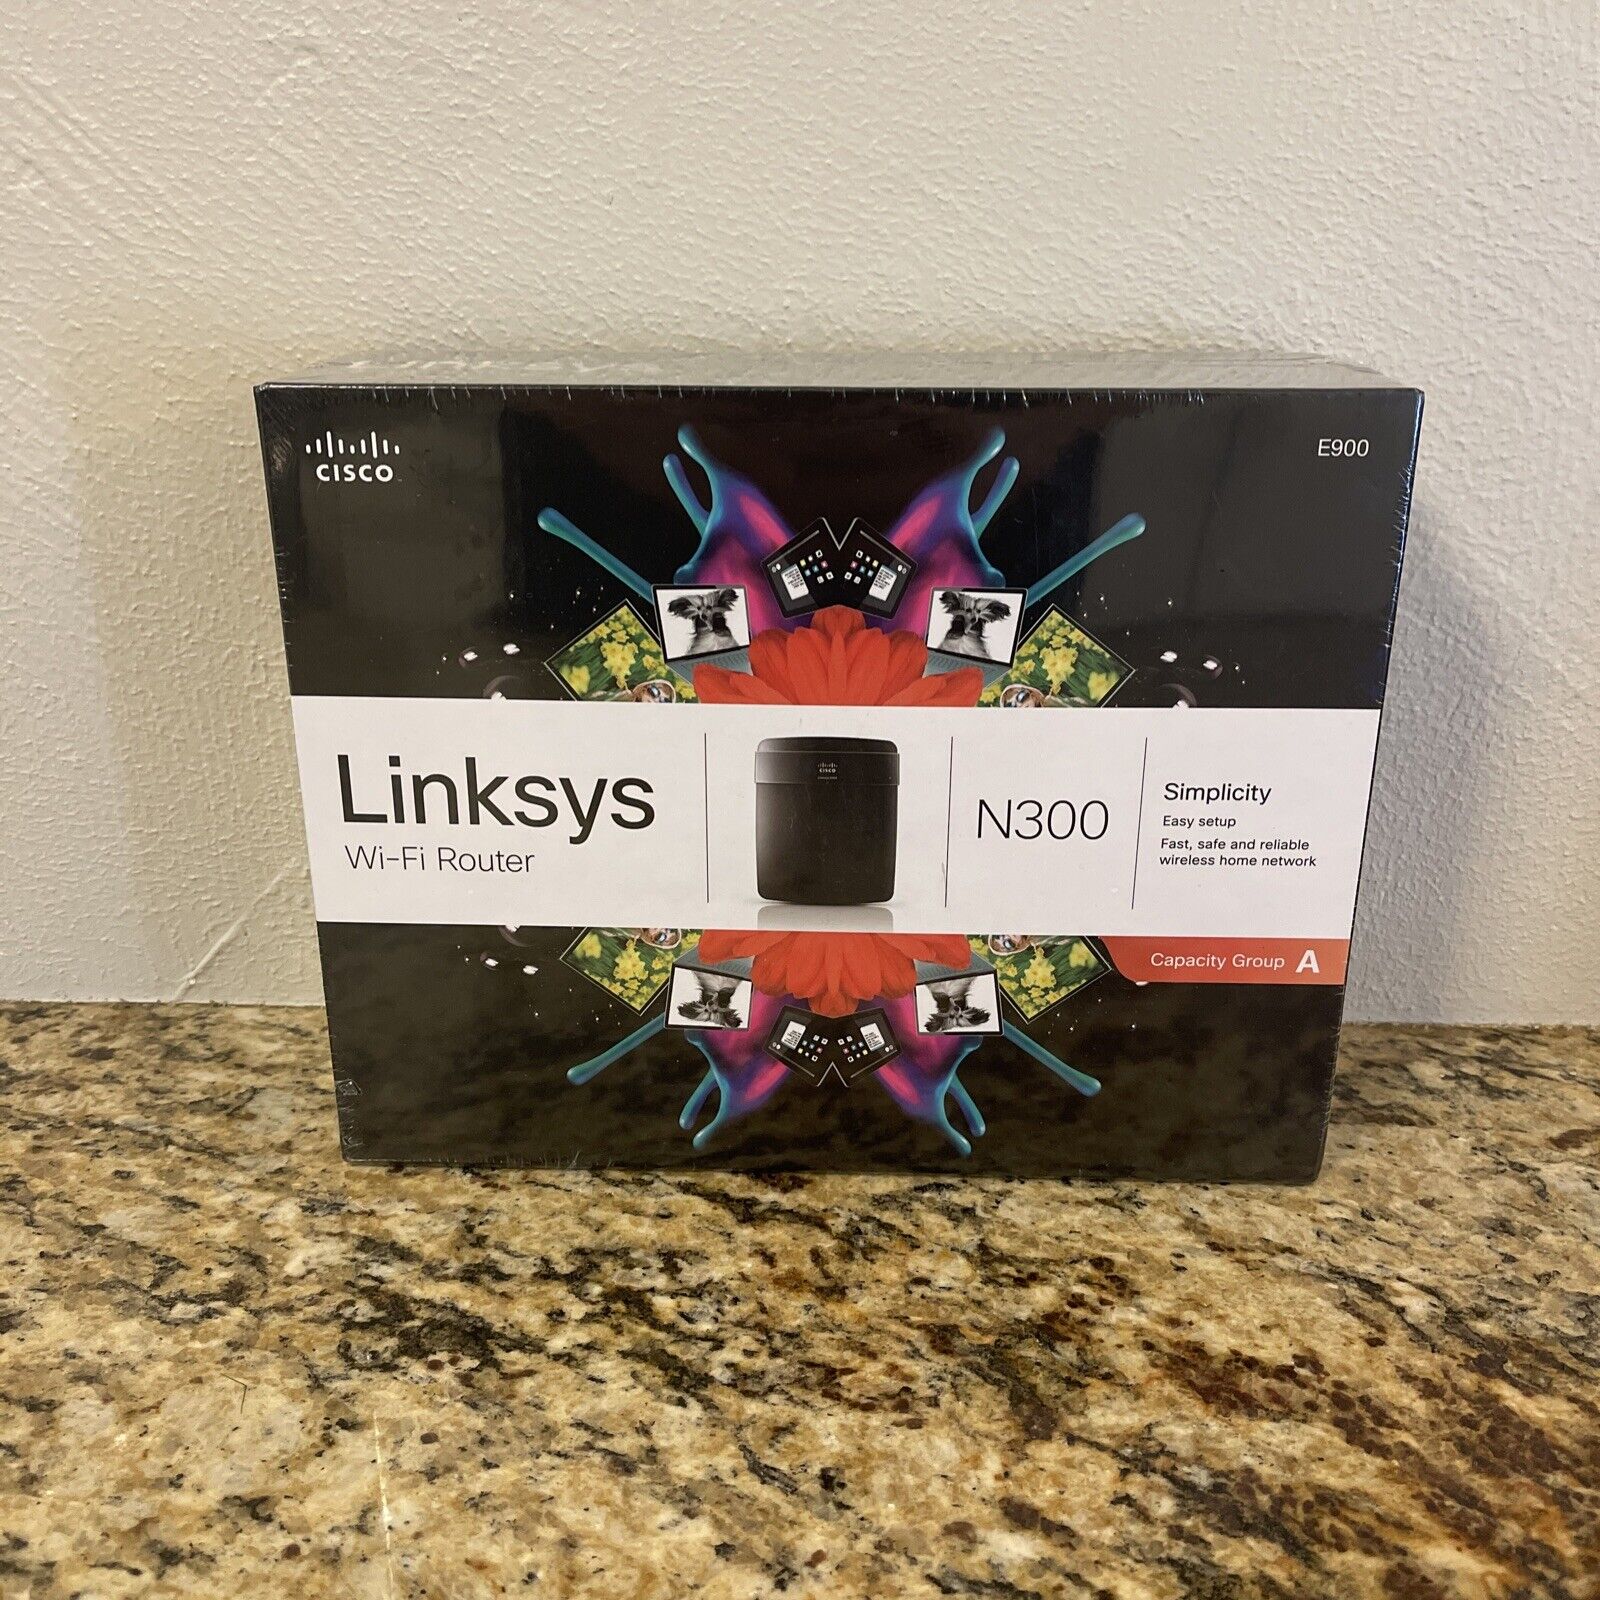 Linksys E900 300 Mbps 4-Port 10/100 Wireless N Router (E900-NP)